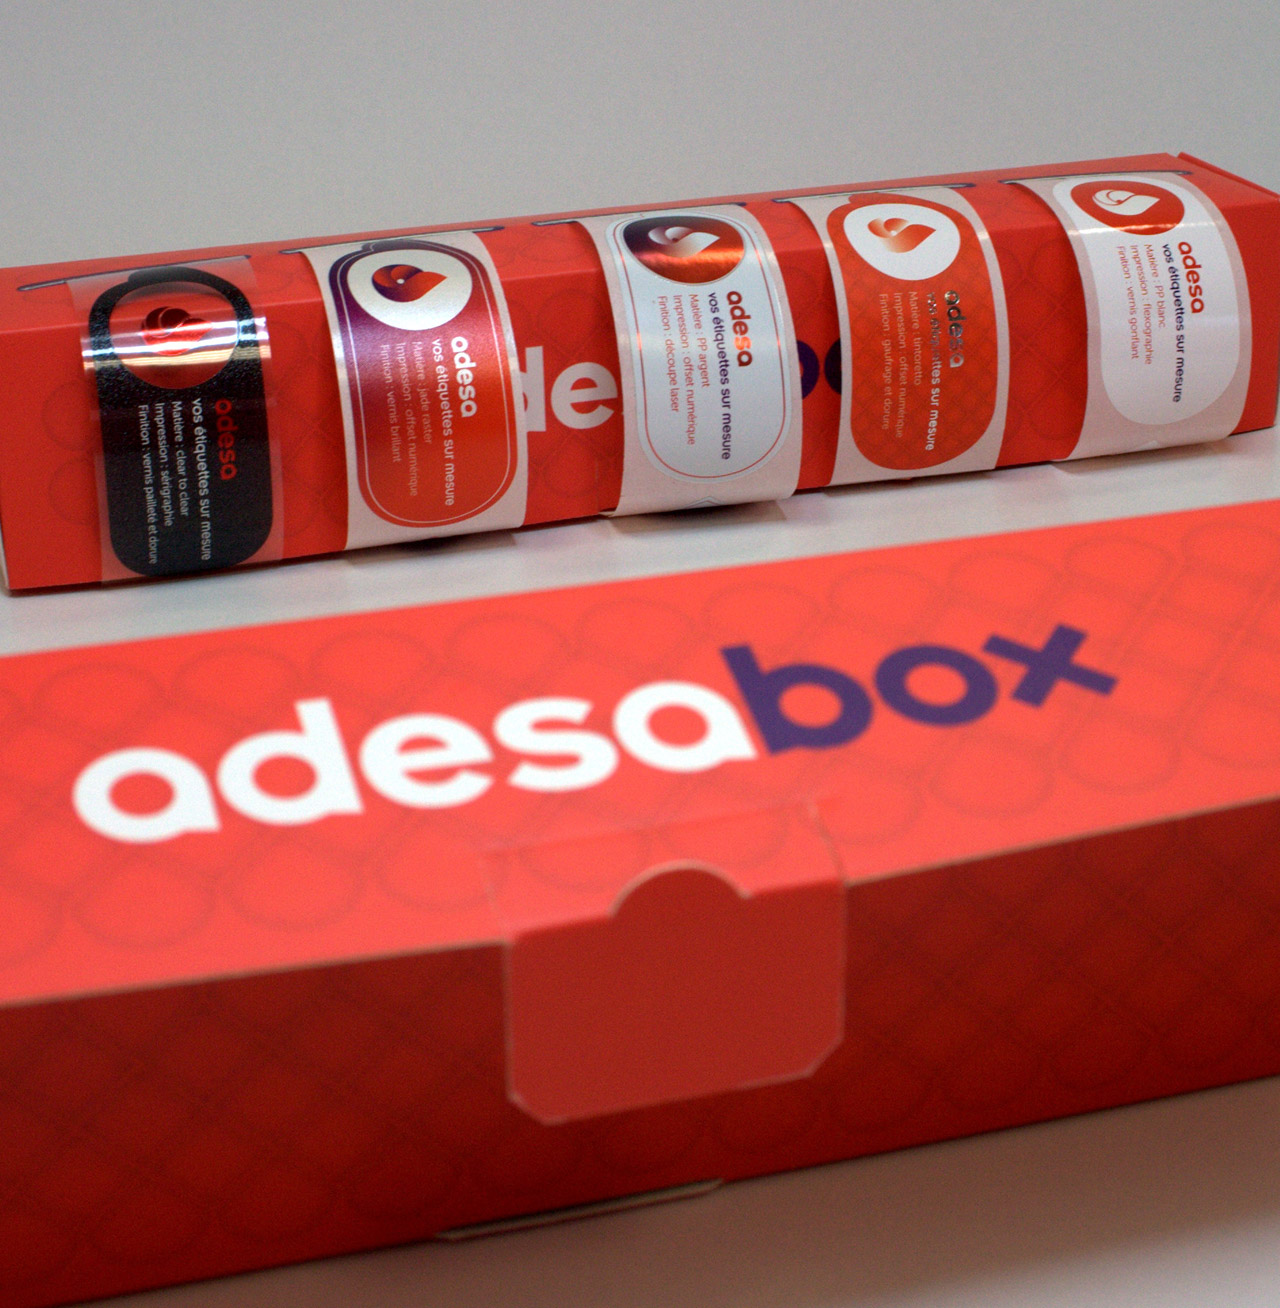 adesa-packaging-adesabox-situation-1-creation-communication-caconcept-alexis-cretin-graphiste